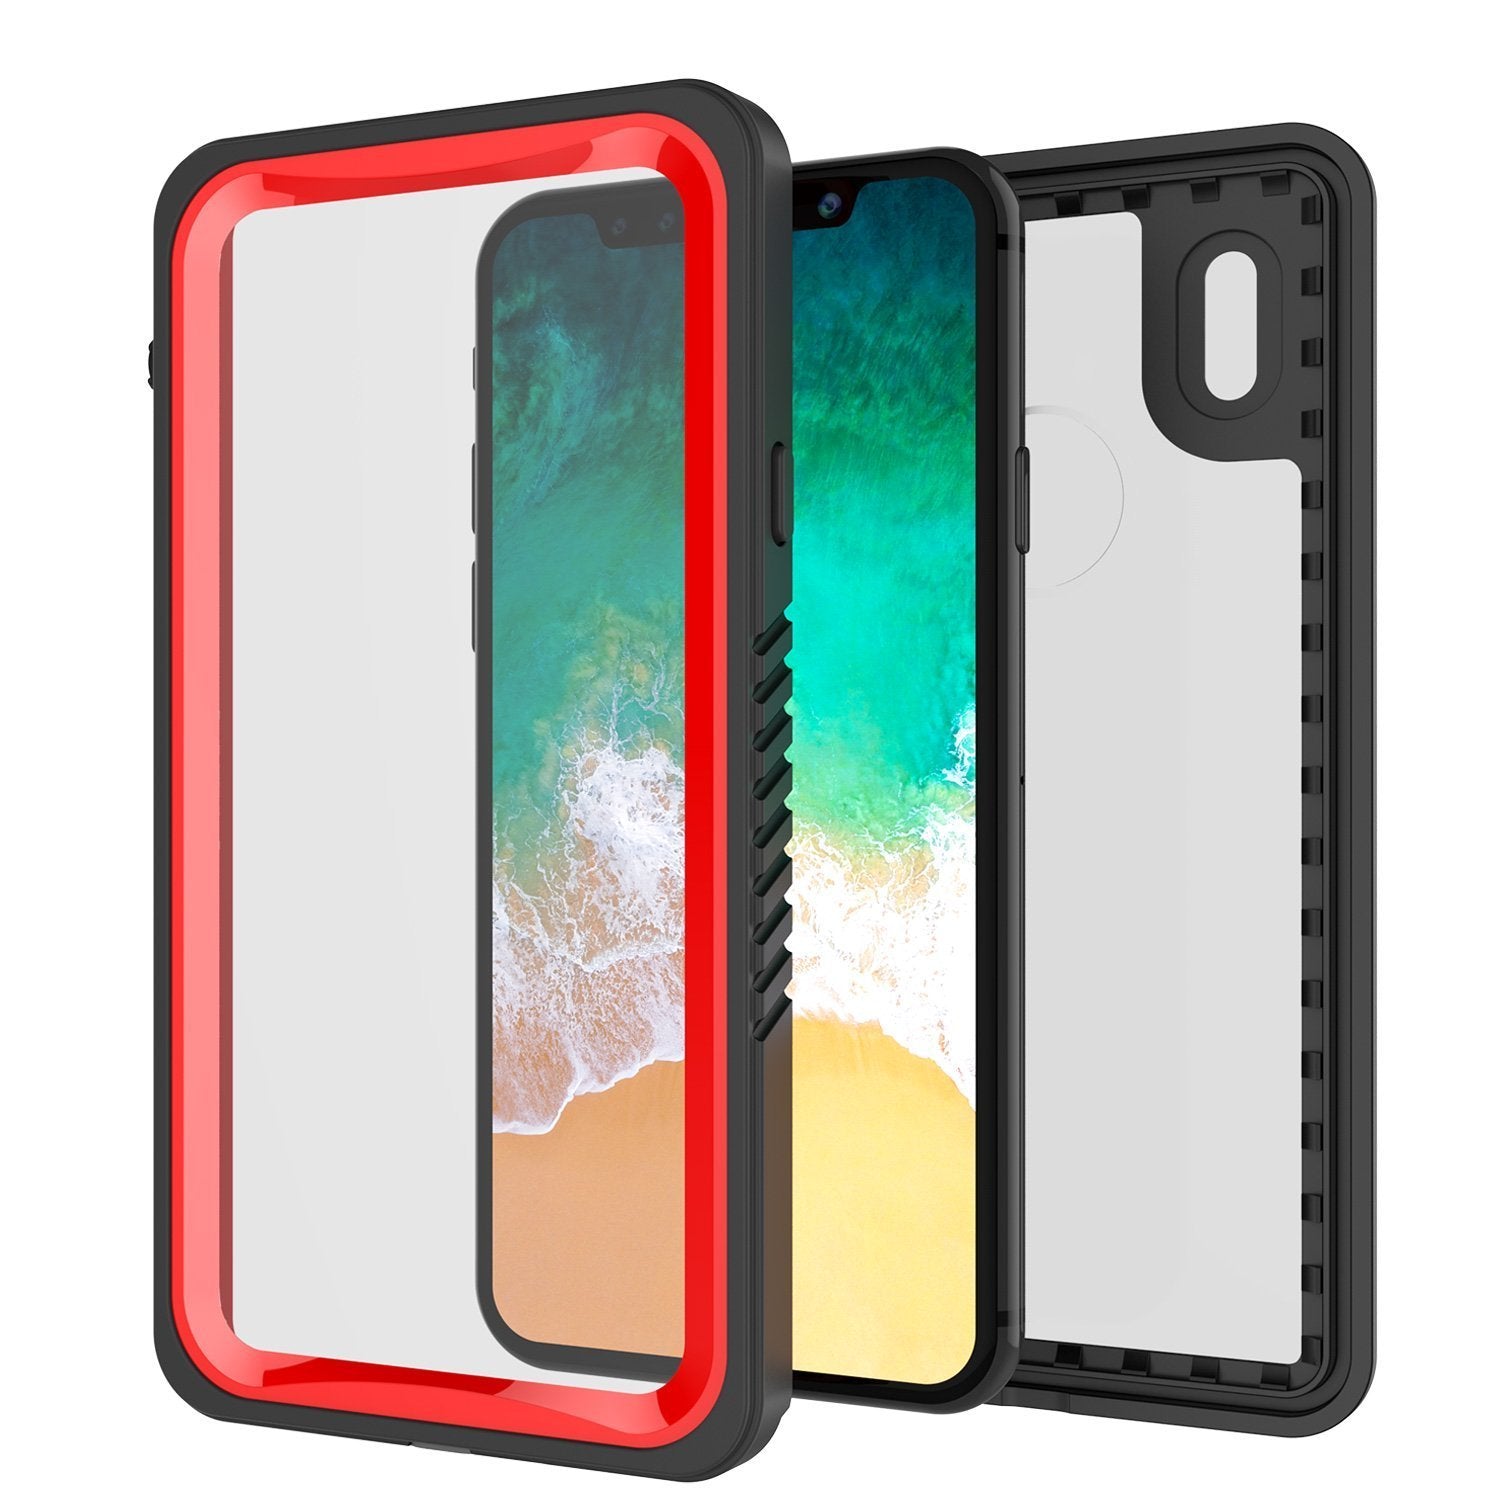 iPhone XS Max Waterproof Case, Punkcase [Extreme Series] Armor Cover W/ Built In Screen Protector [Red] - PunkCase NZ